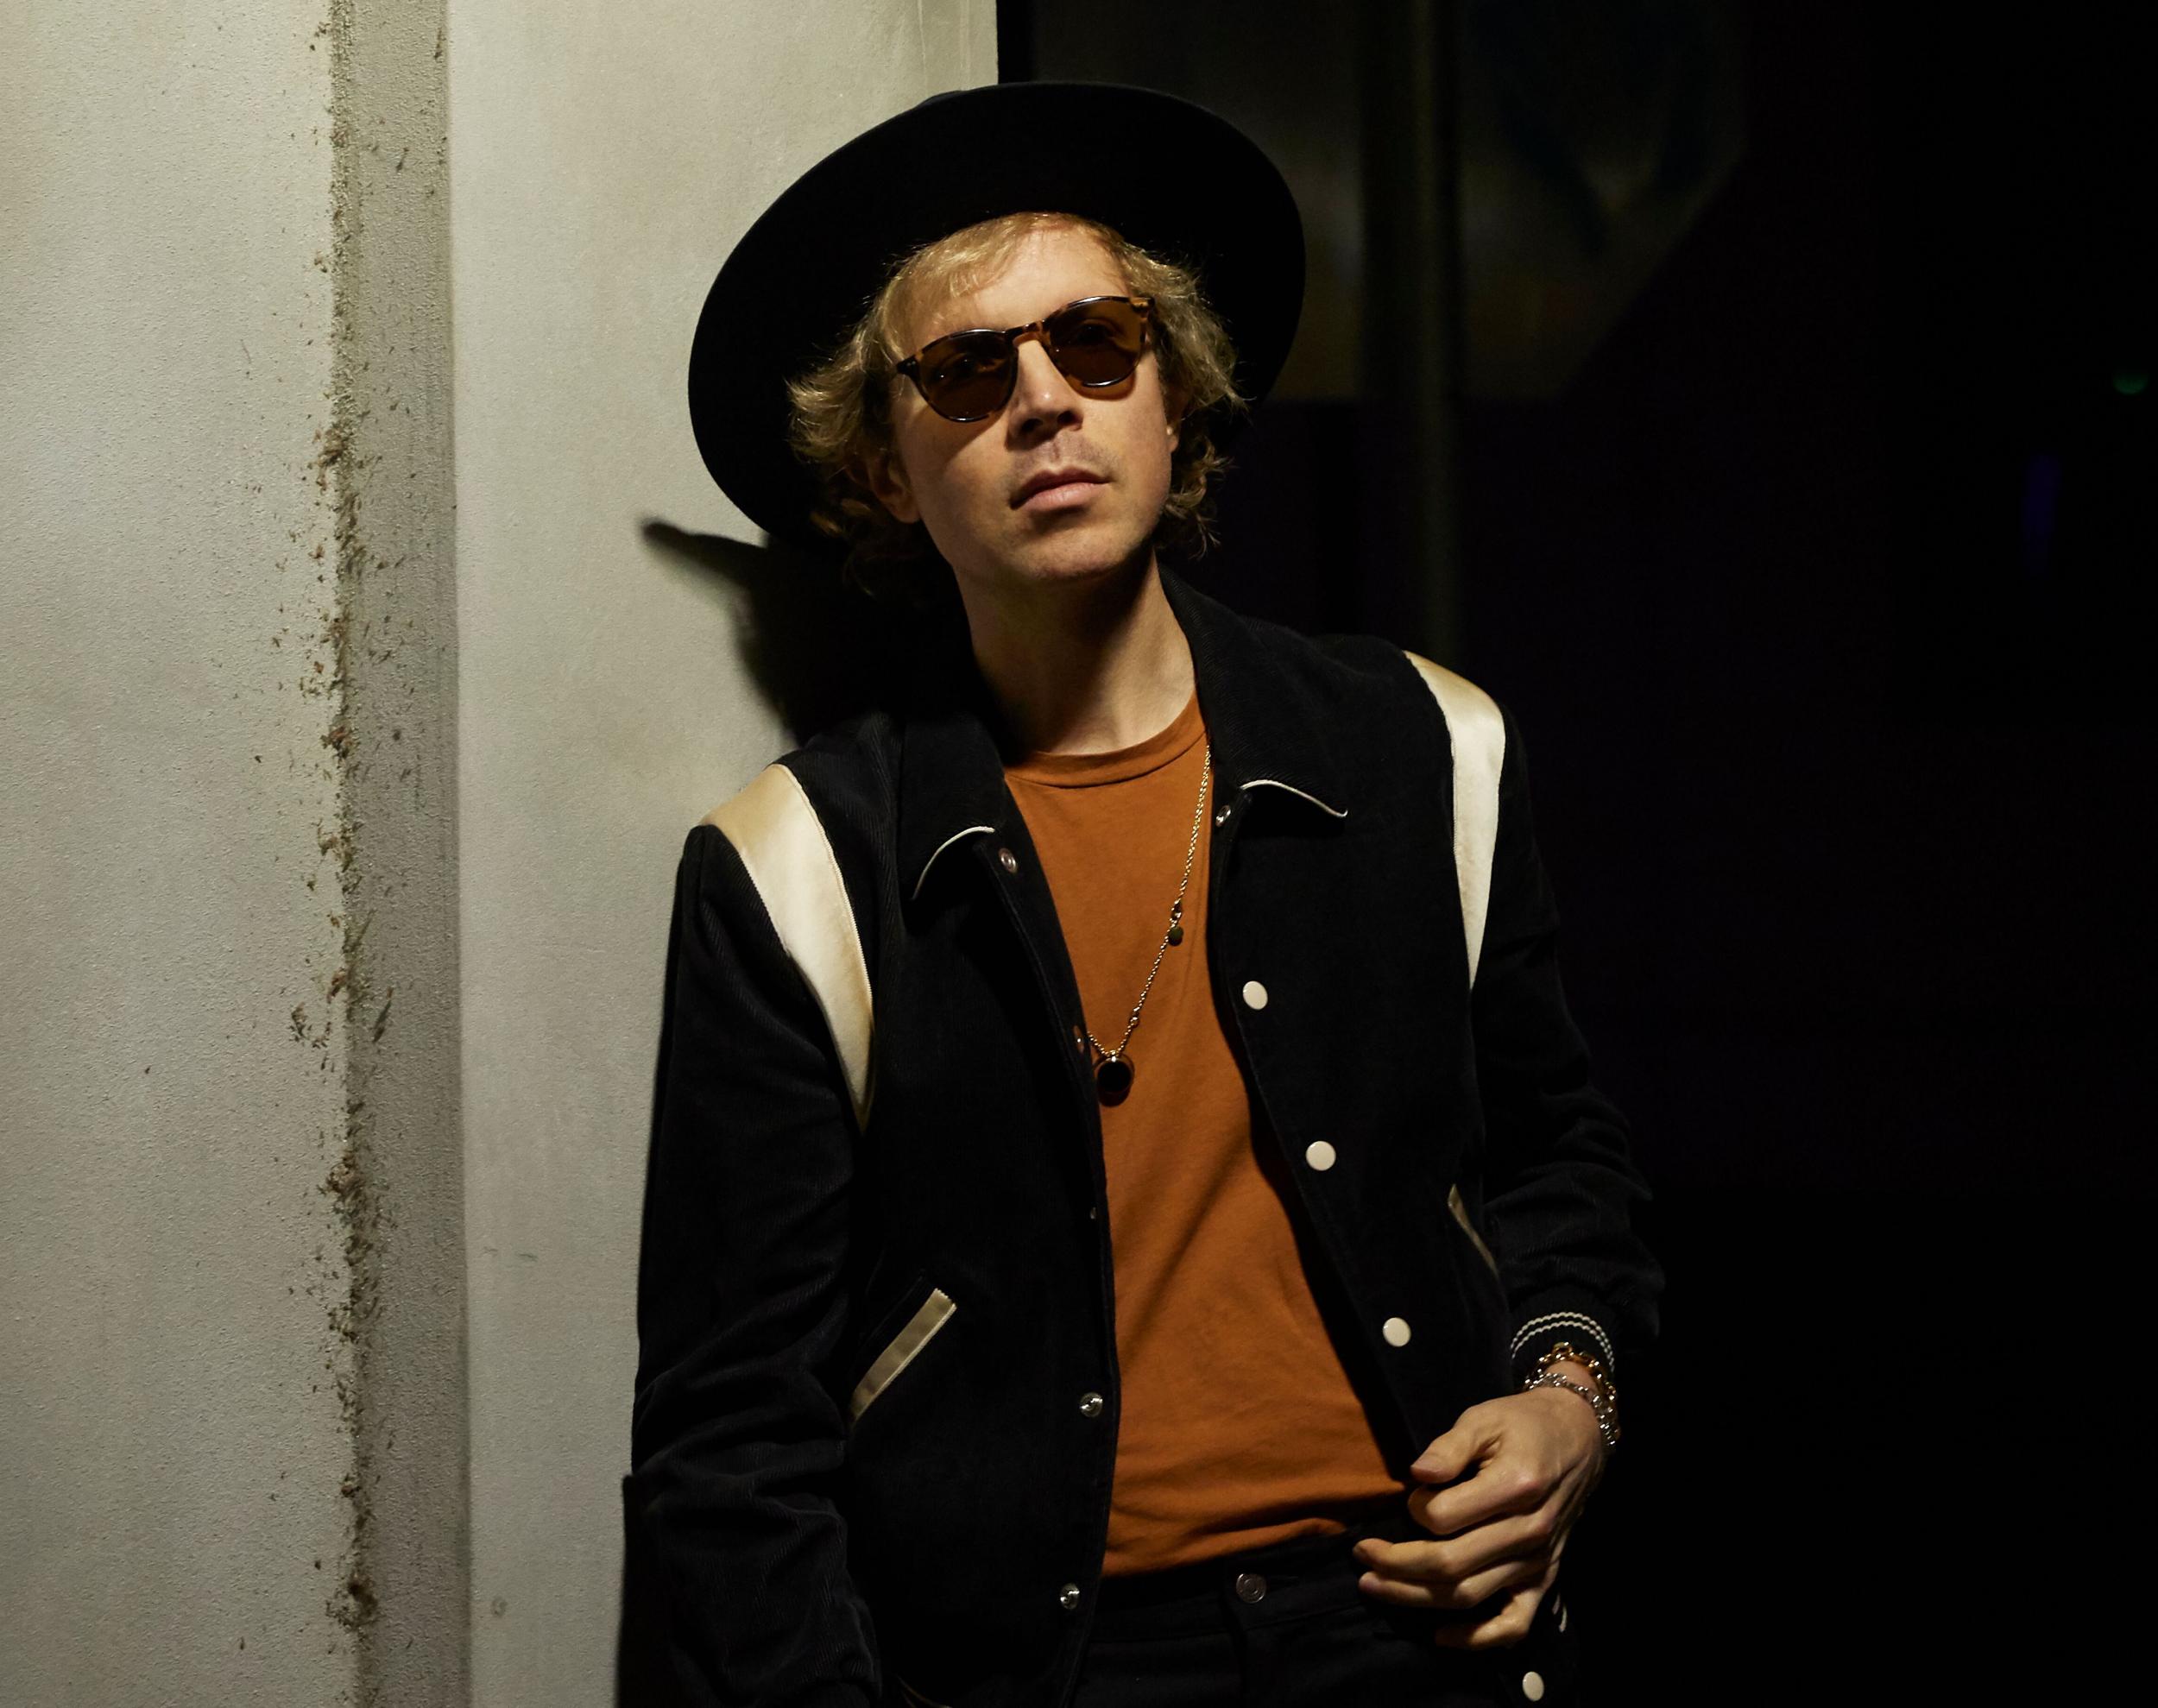 Beck: ‘My original thought when I first met with Pharrell was I just wanted to make something that had a kind of joy to it, a happiness’